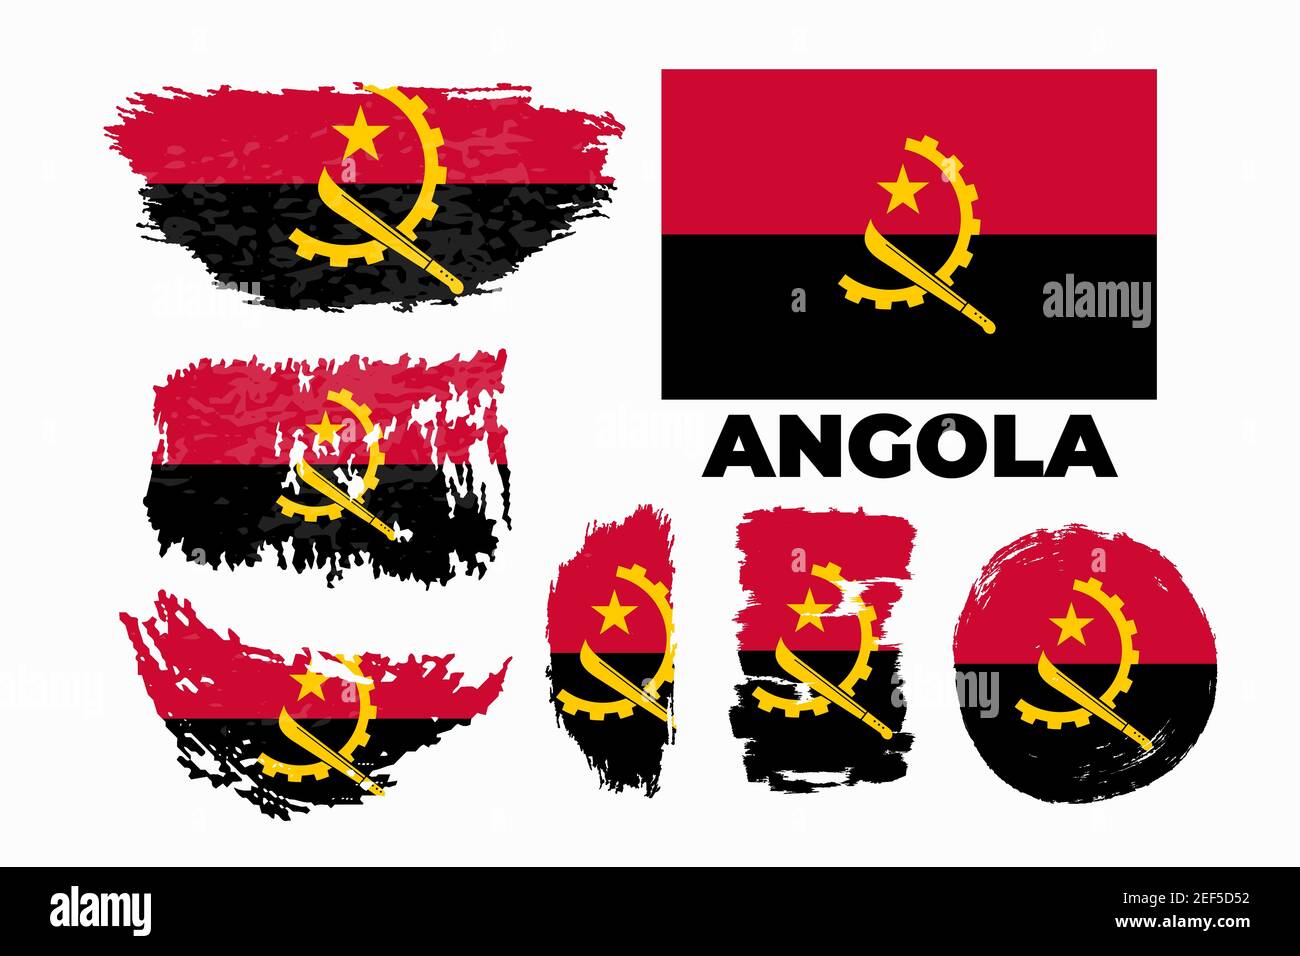 An illustration of the flag of Angola page symbol Vector illustration Stock Vector